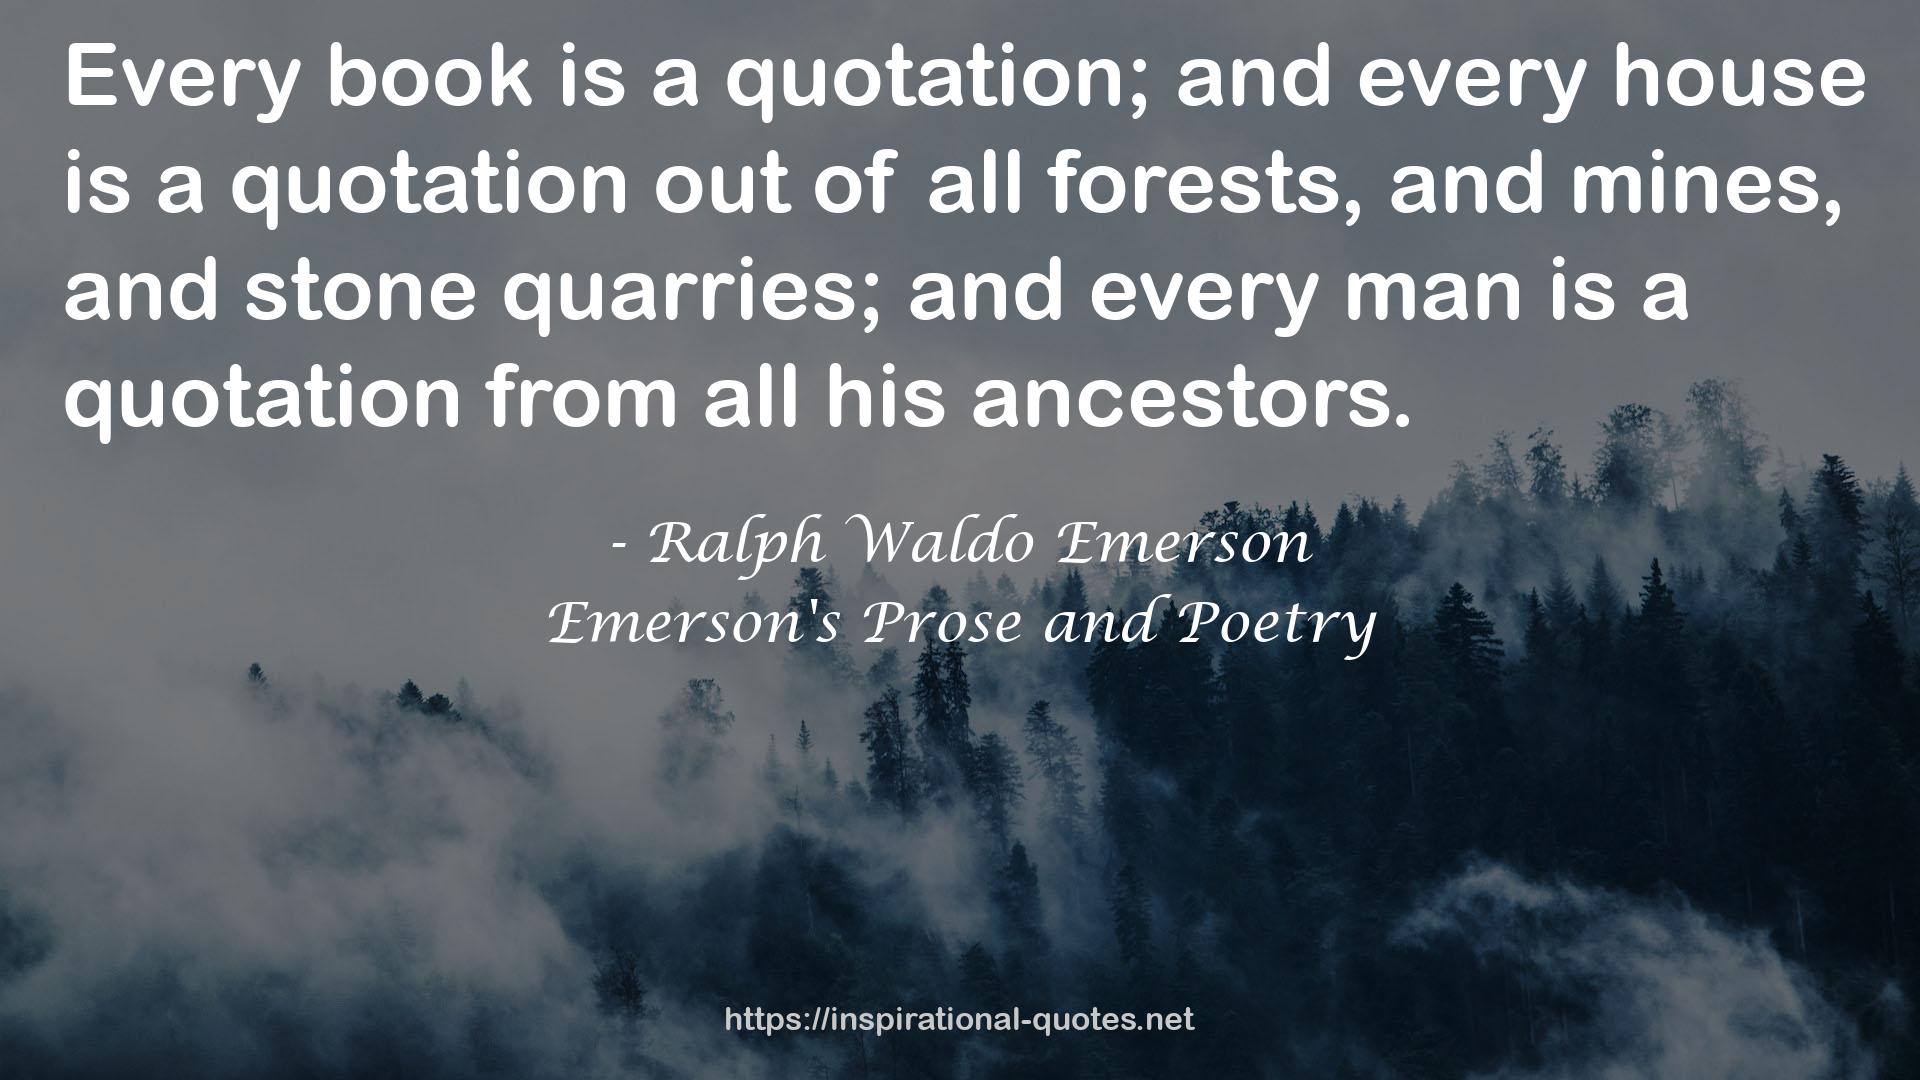 Emerson's Prose and Poetry QUOTES